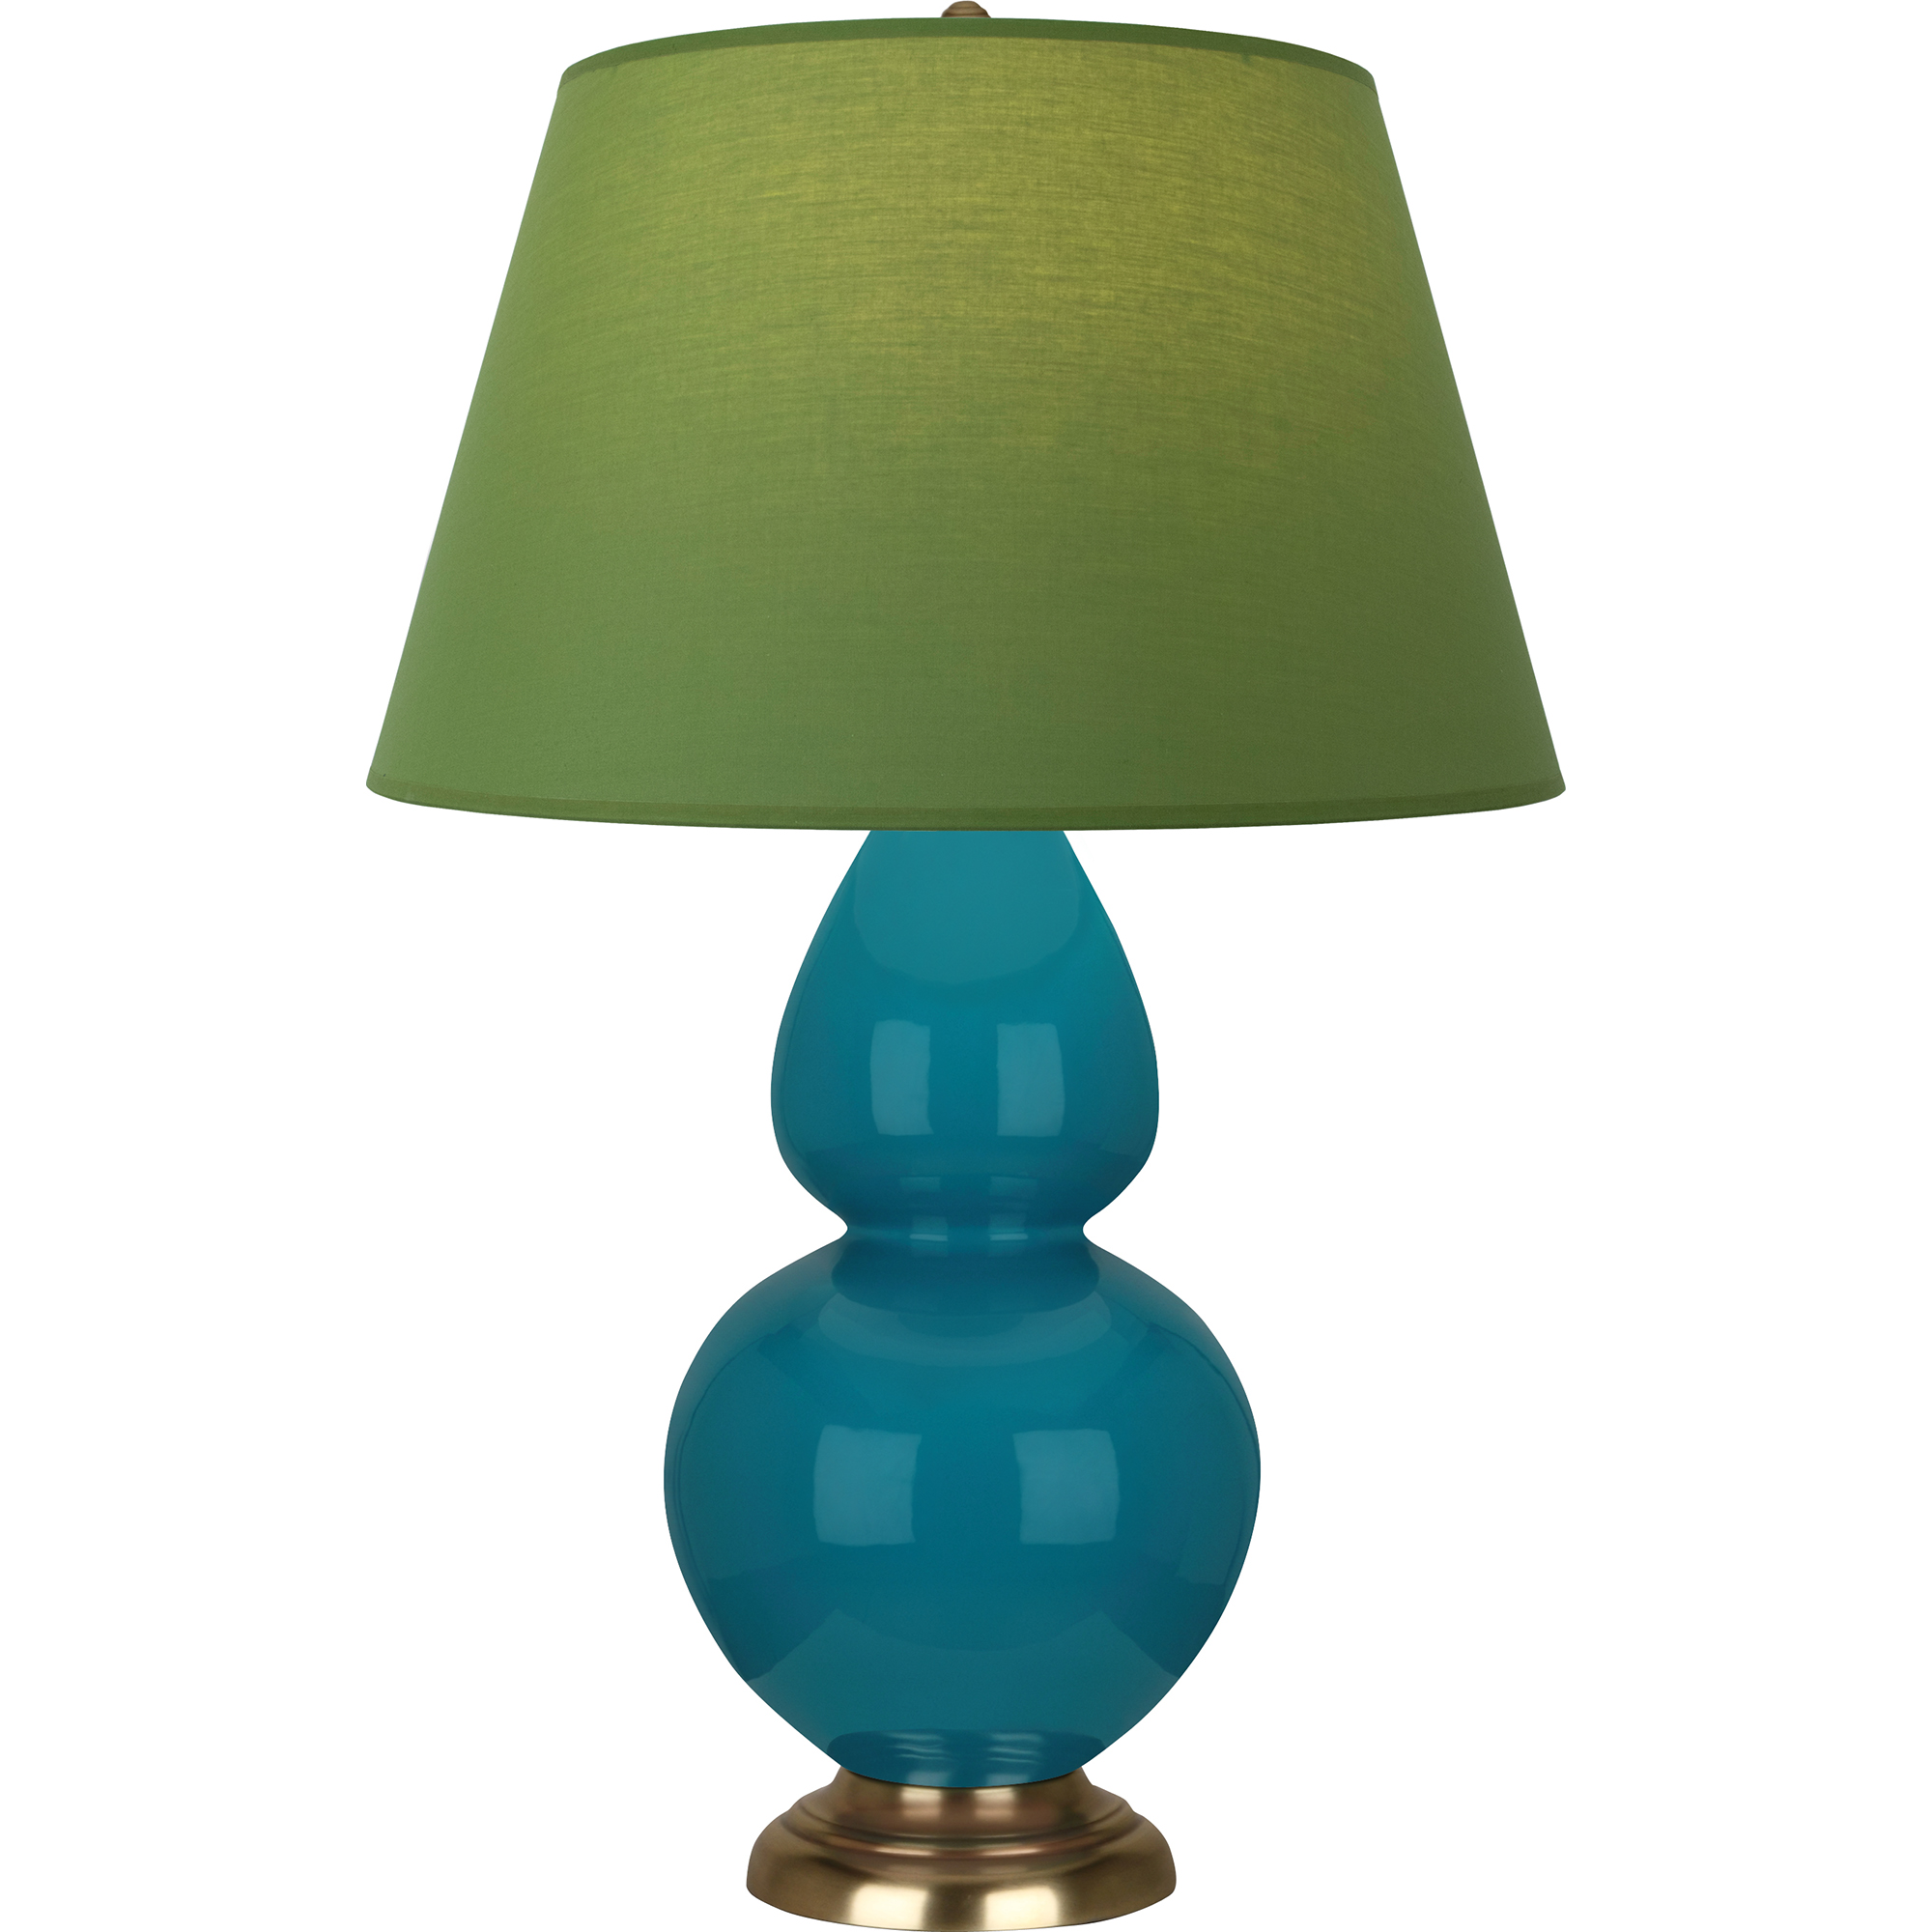 Double Gourd Table Lamp Style #1751G